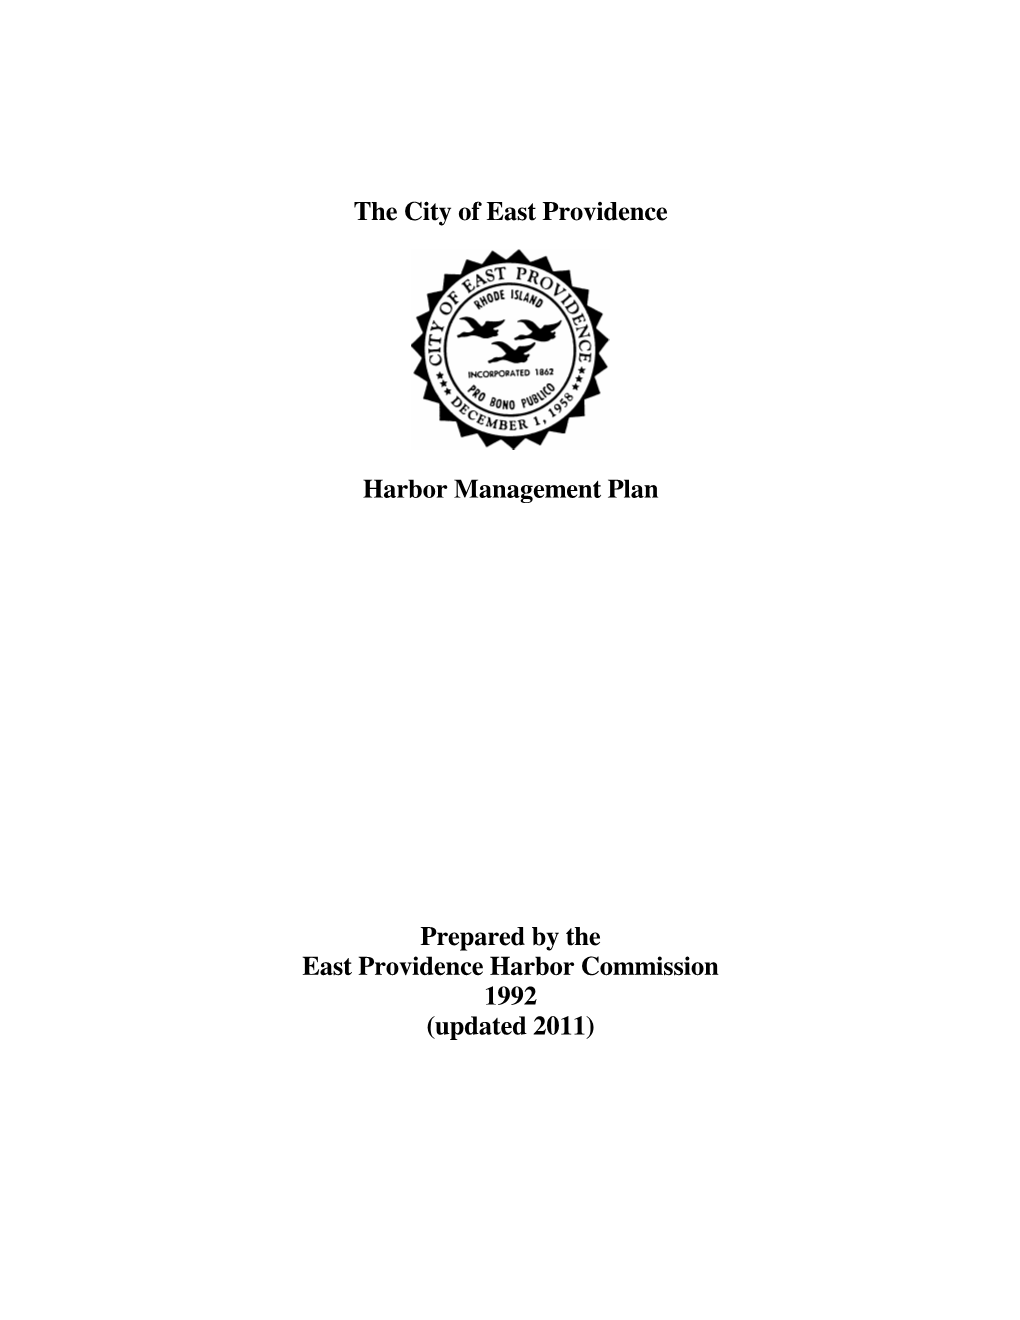 The City of East Providence Harbor Management Plan Prepared by The